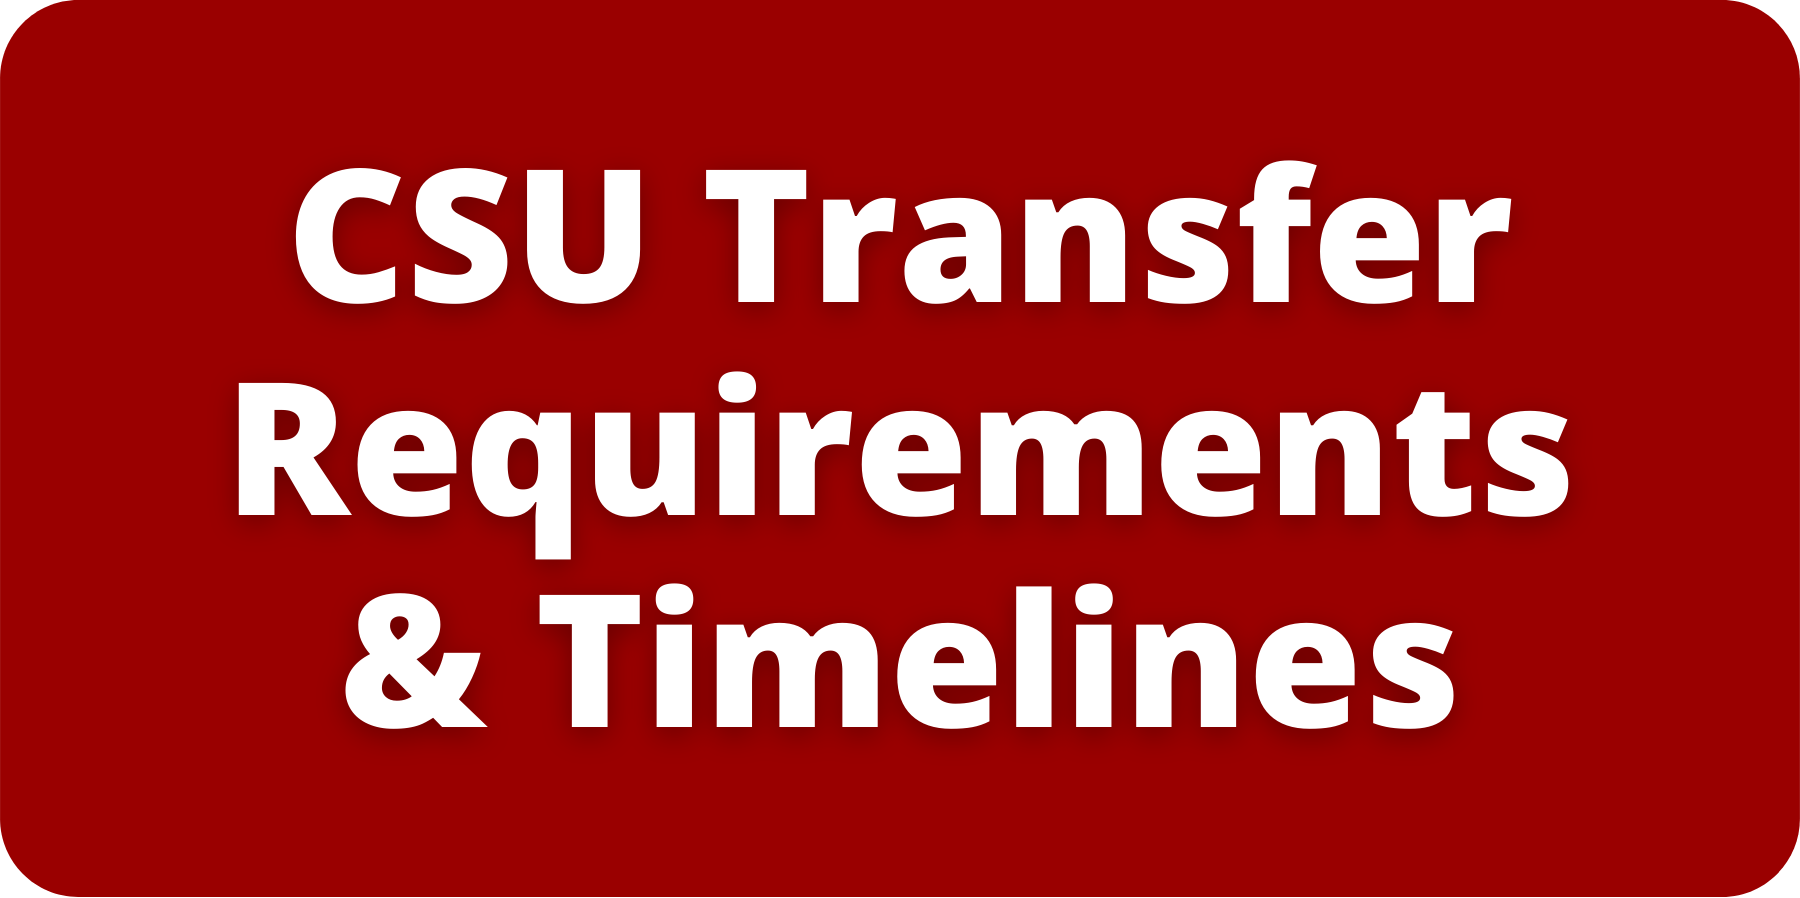 CSU Transfer Requirements & Timelines